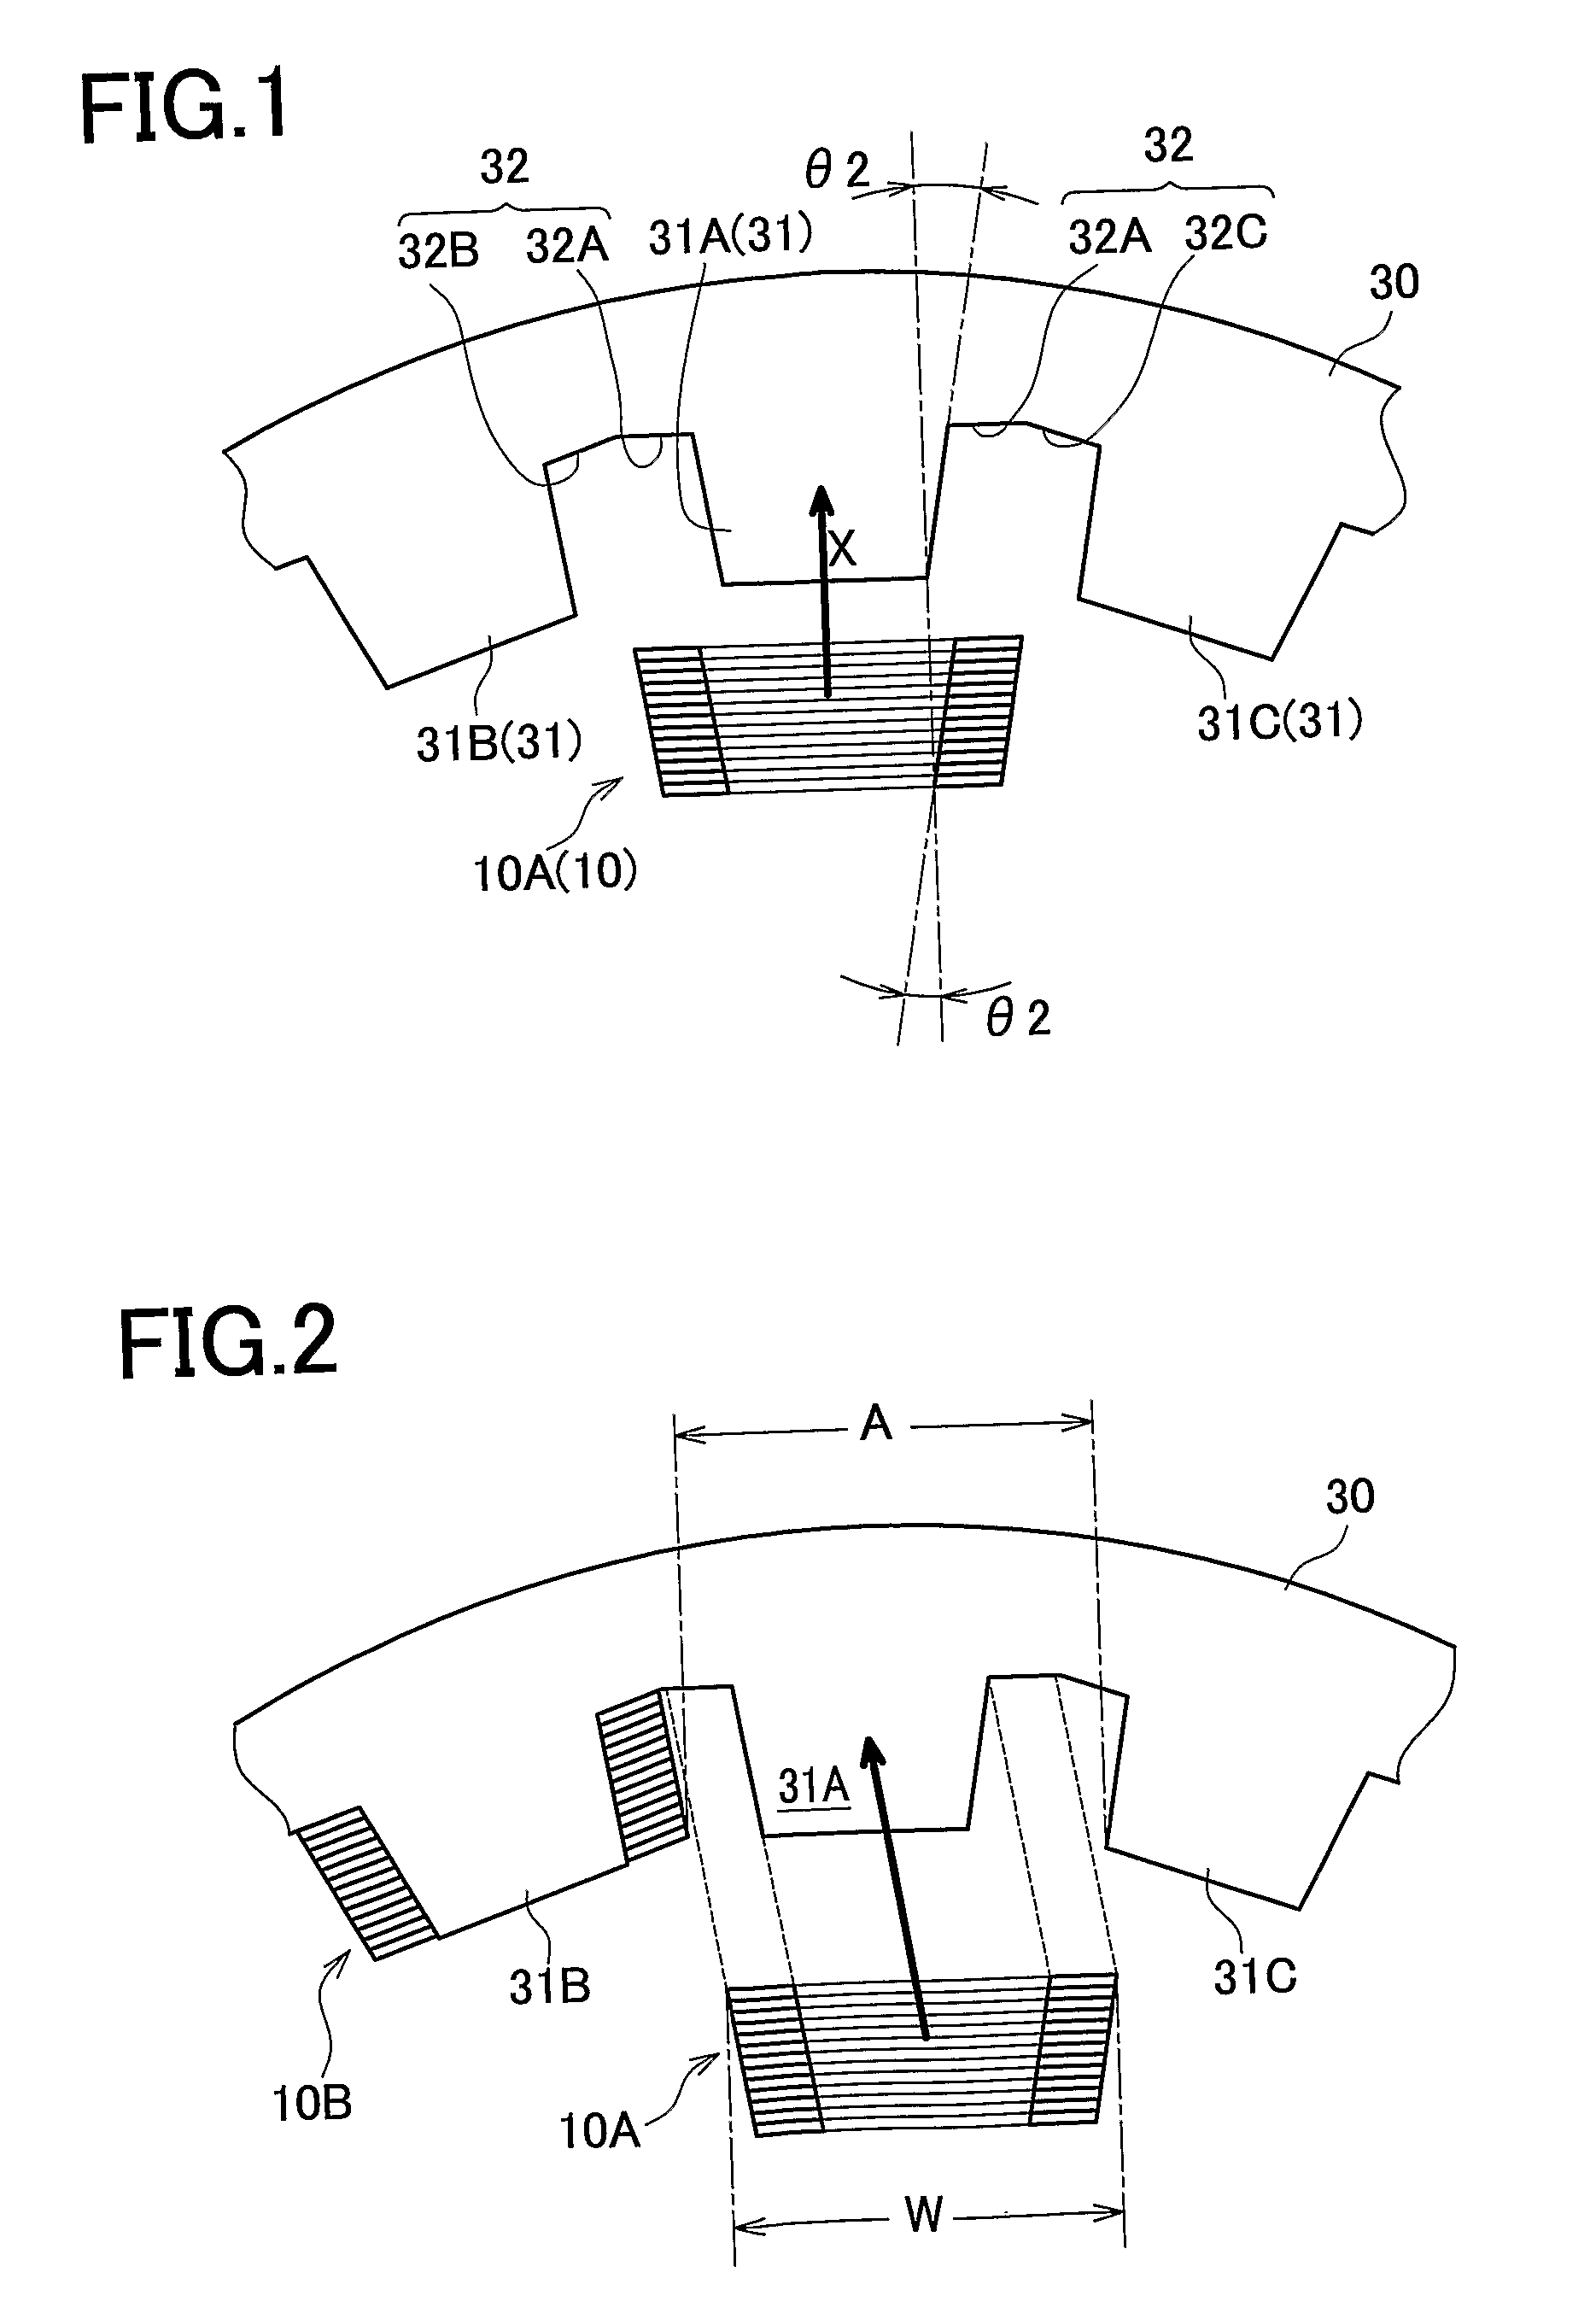 Insertion of pre-fabricated concentrated windings into stator slots